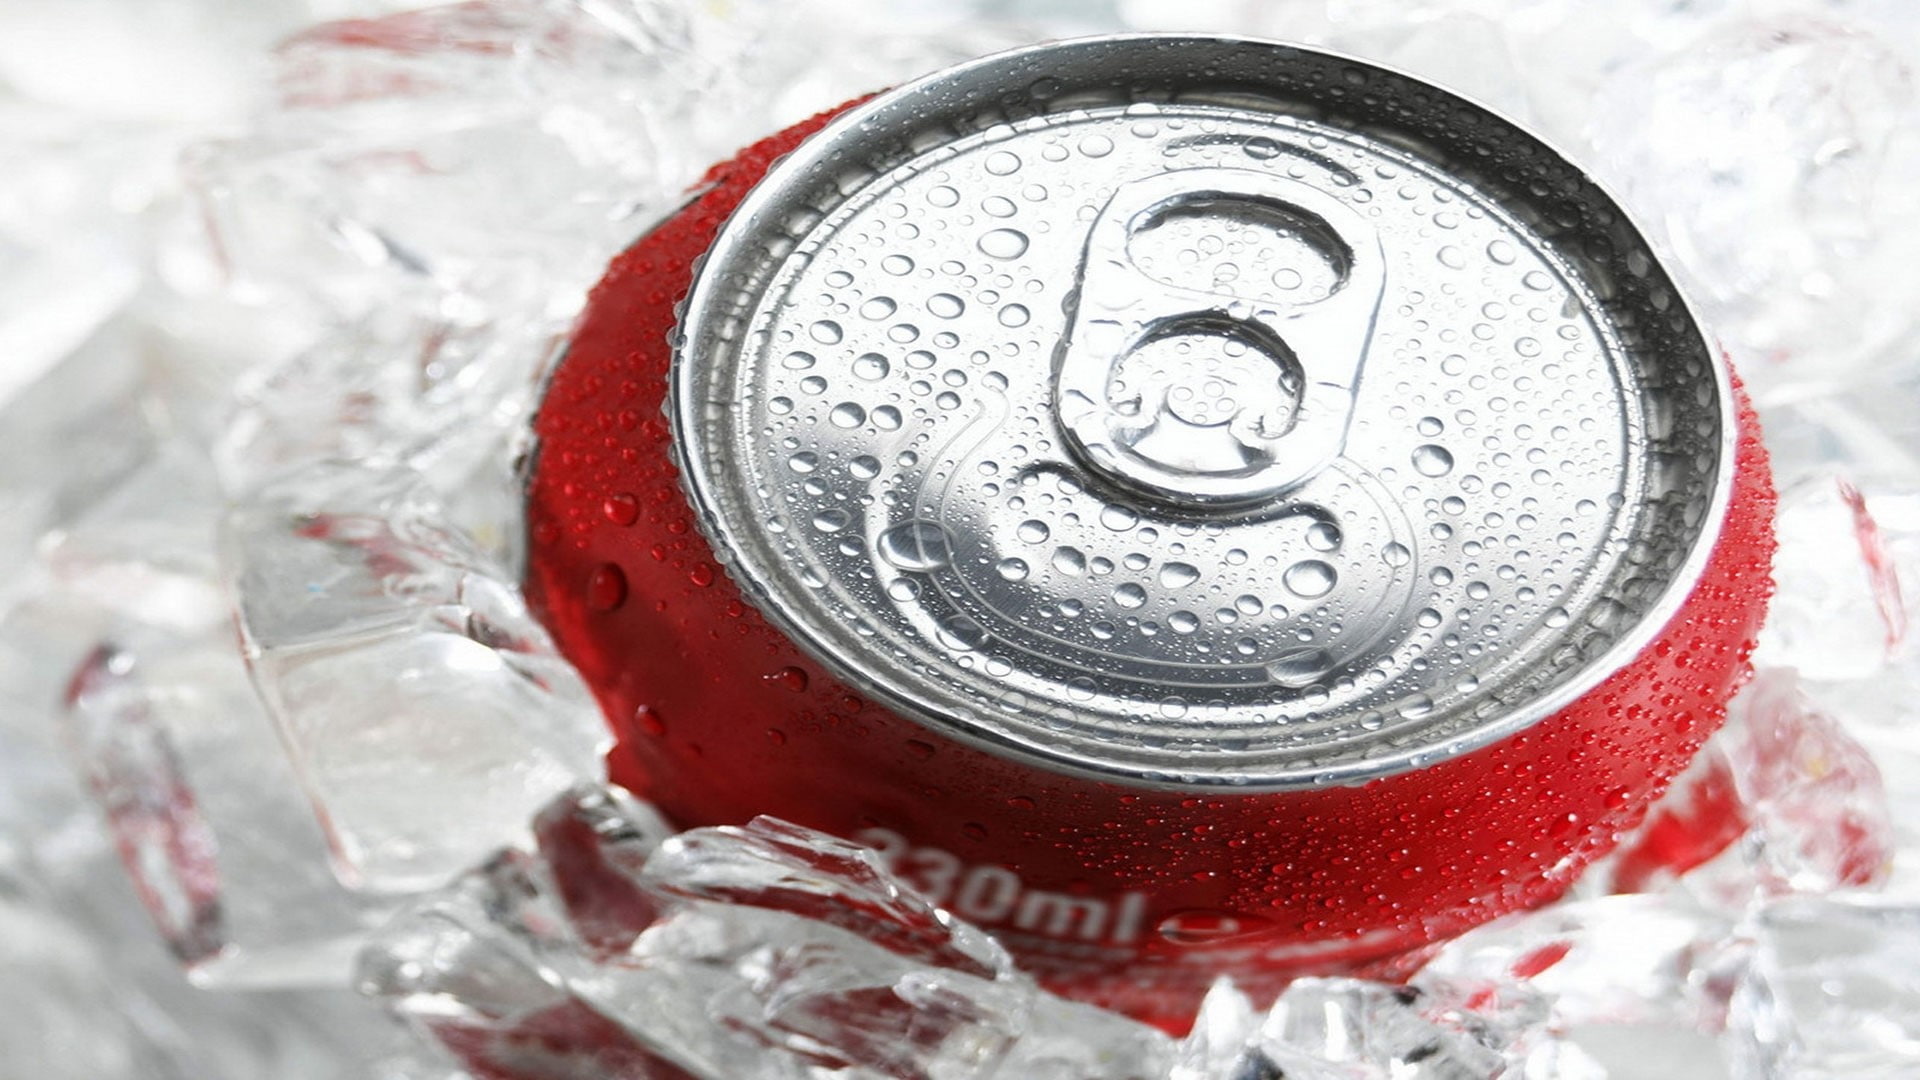 Coca-cola, Drink, Ice, Bank, refreshment, food and drink, drink can